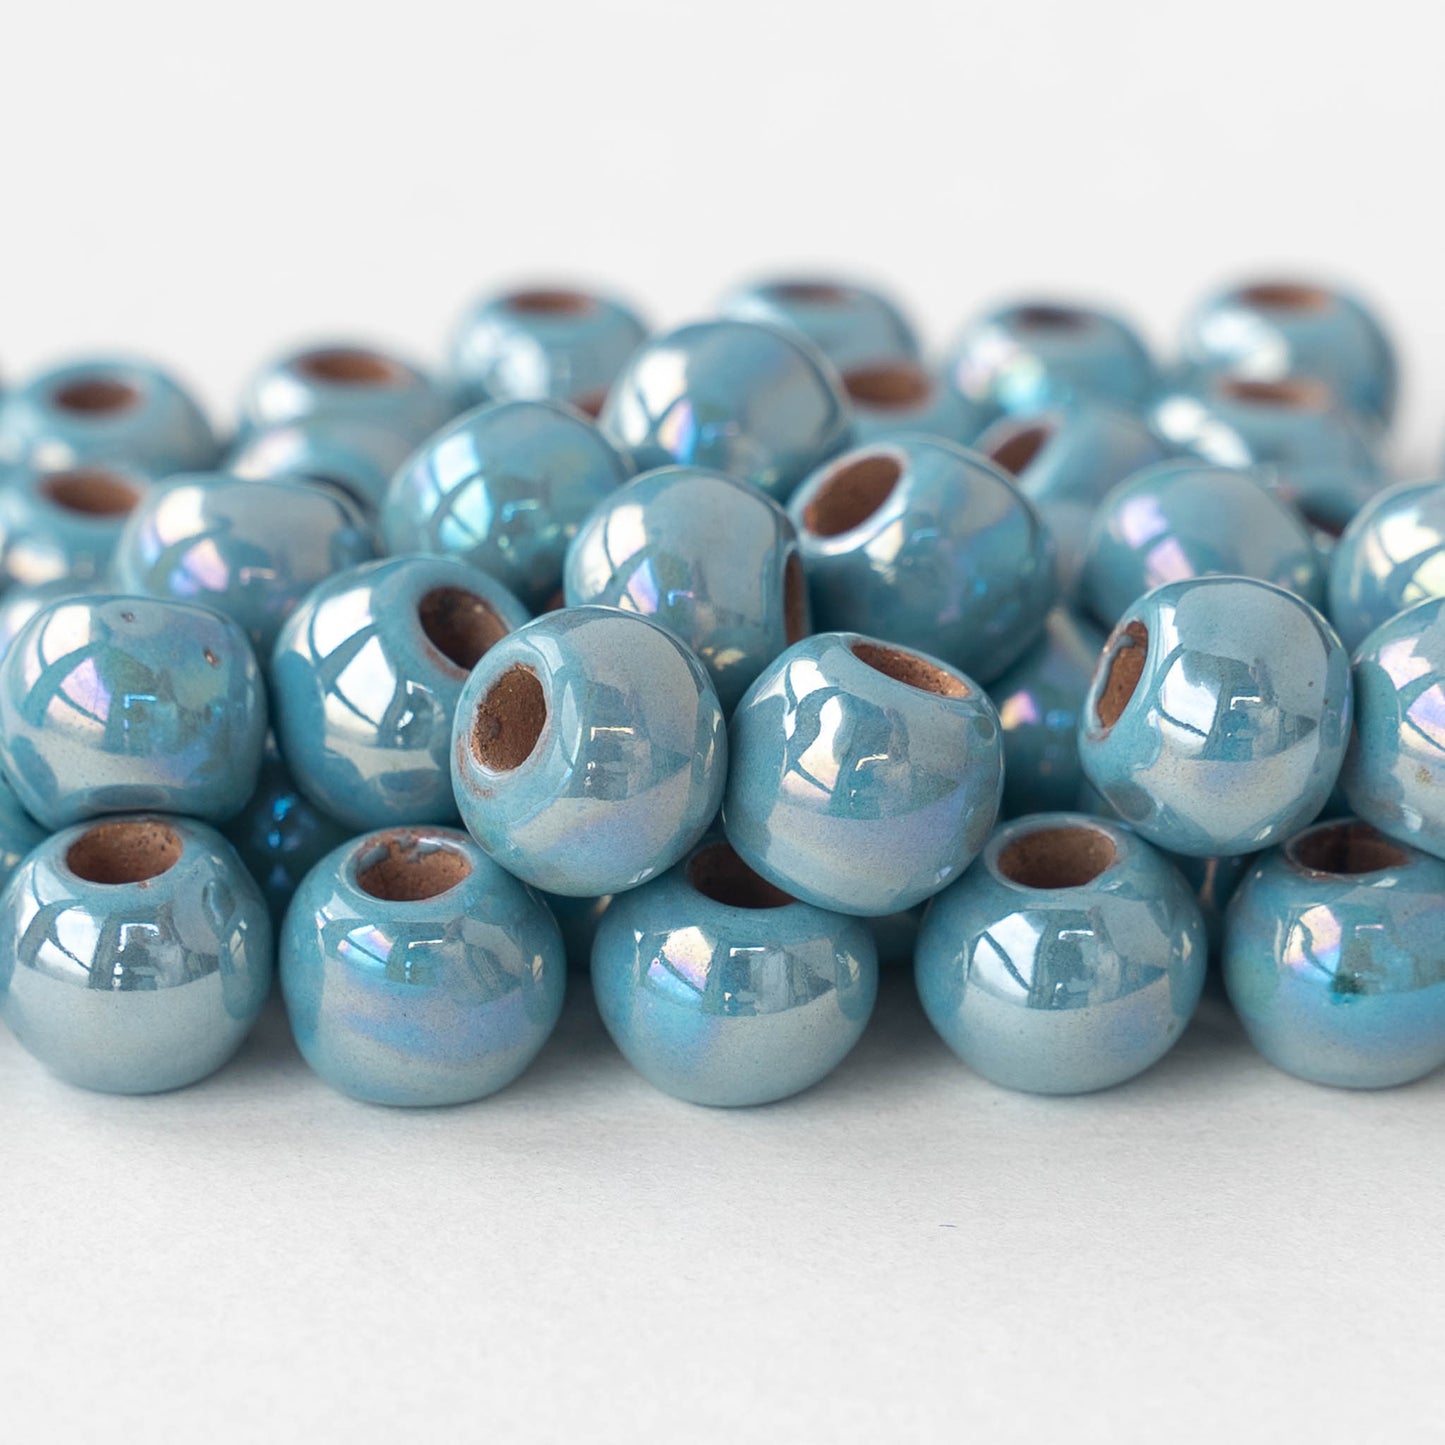 Ten 12mm Bright Opaque Turquoise Blue big large hole glass beads with 3mm  holes, smooth round druk beads, Made in India C9401 – Glorious Glass Beads